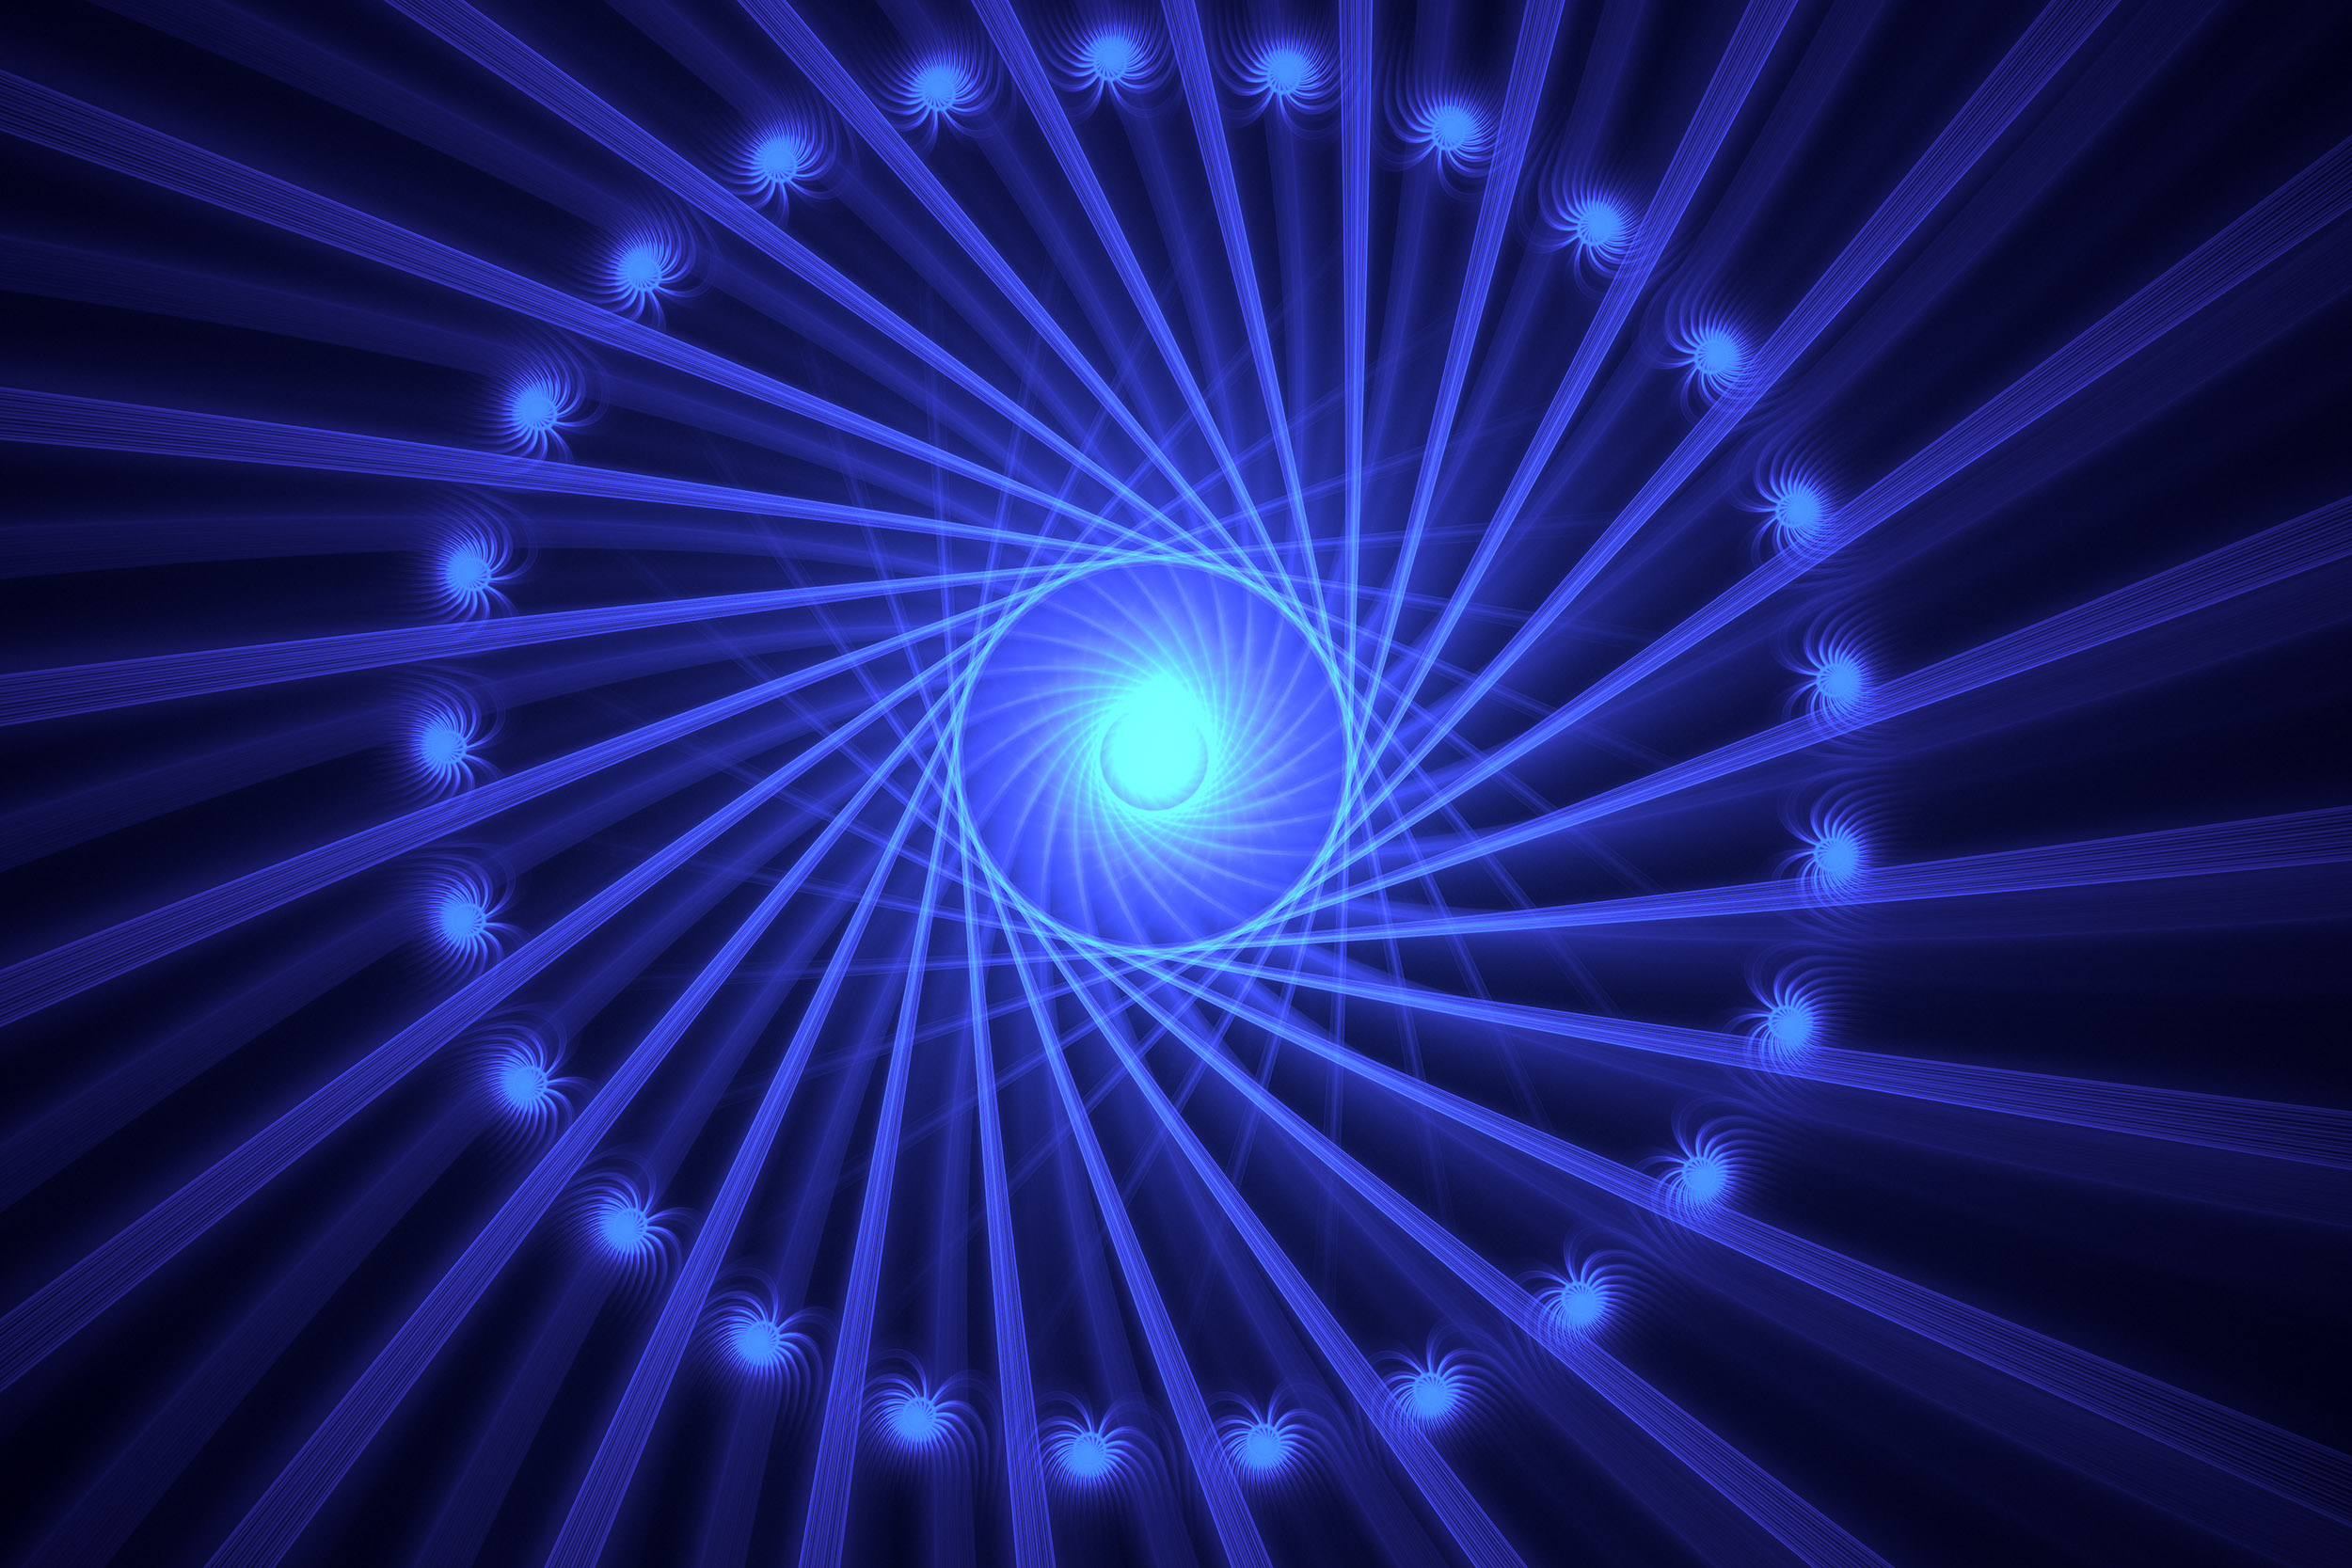 Free photo: Fractal spinning light - Abstract, Blue, Dark - Free ...